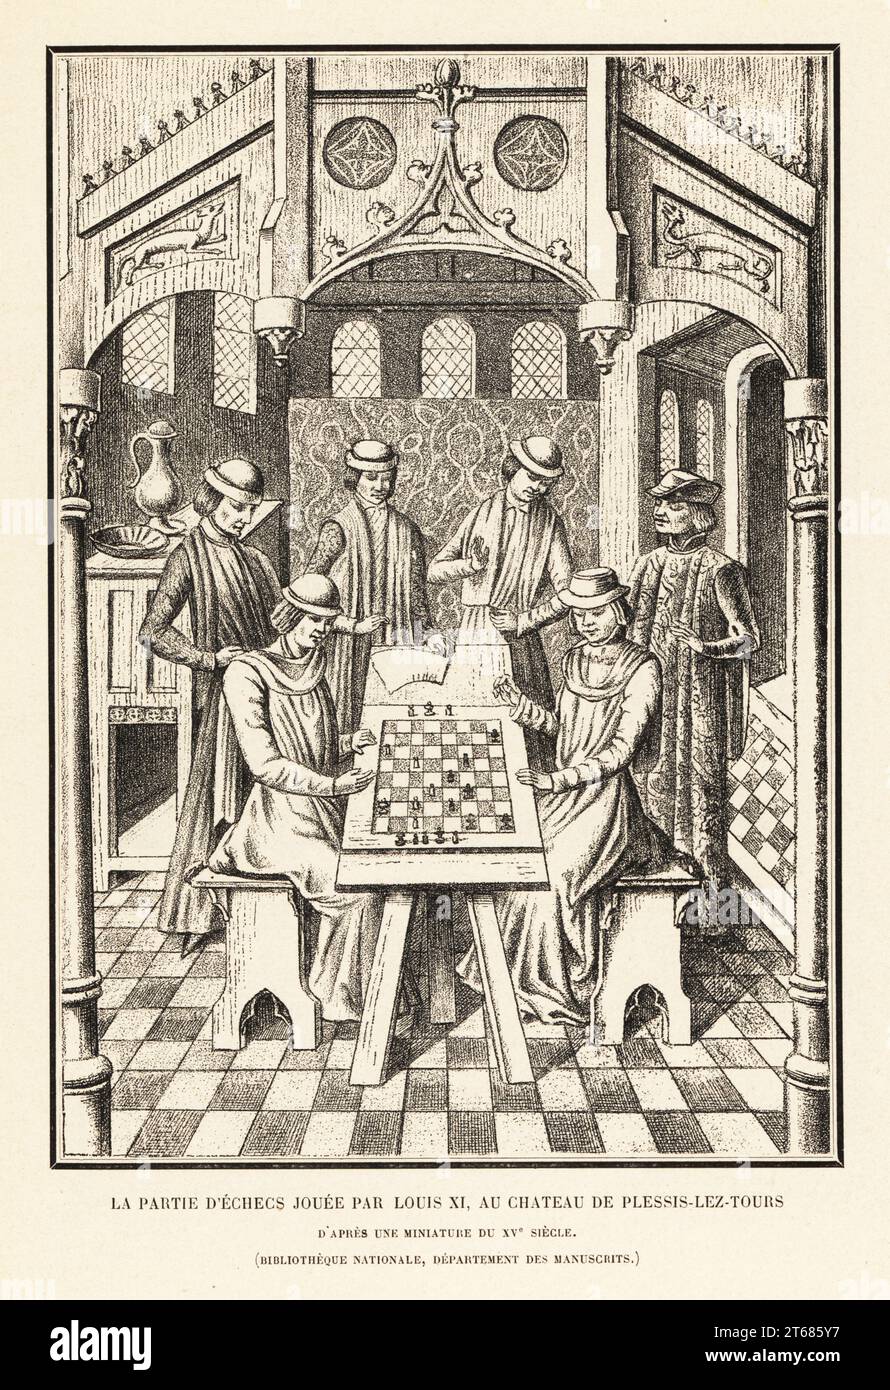 Royal courtiers playing a game of chess at the Chateau de Plessis-lez-Tours, 1483. King Louis XI of France, 1423-83, is said to be seated right. After a 15th century miniature Le Livre des Trois Ages by Pierre Choisnet aka Estienne Porchier in the Bibliotheque Nationale. Partie d'echecs jouee par Louis XI. Lithograph from Henry Rene dAllemagnes Recreations et Passe-Temps, Games and Pastimes, Hachette, Paris, 1906. Stock Photo